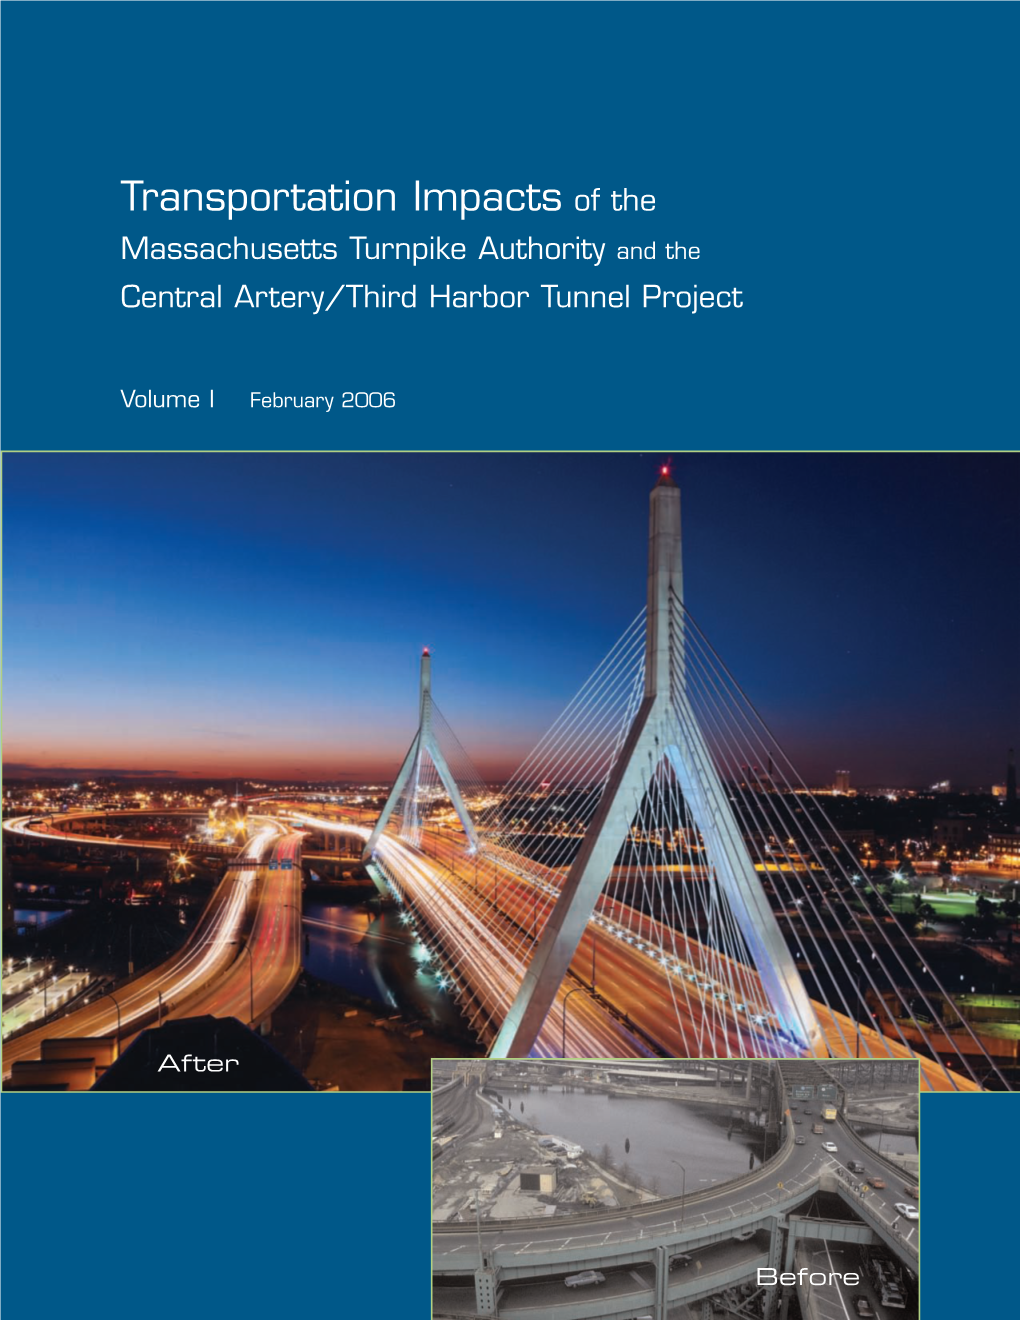 Transportation Impacts of the Massachusetts Turnpike Authority and the Central Artery/Third Harbor Tunnel Project